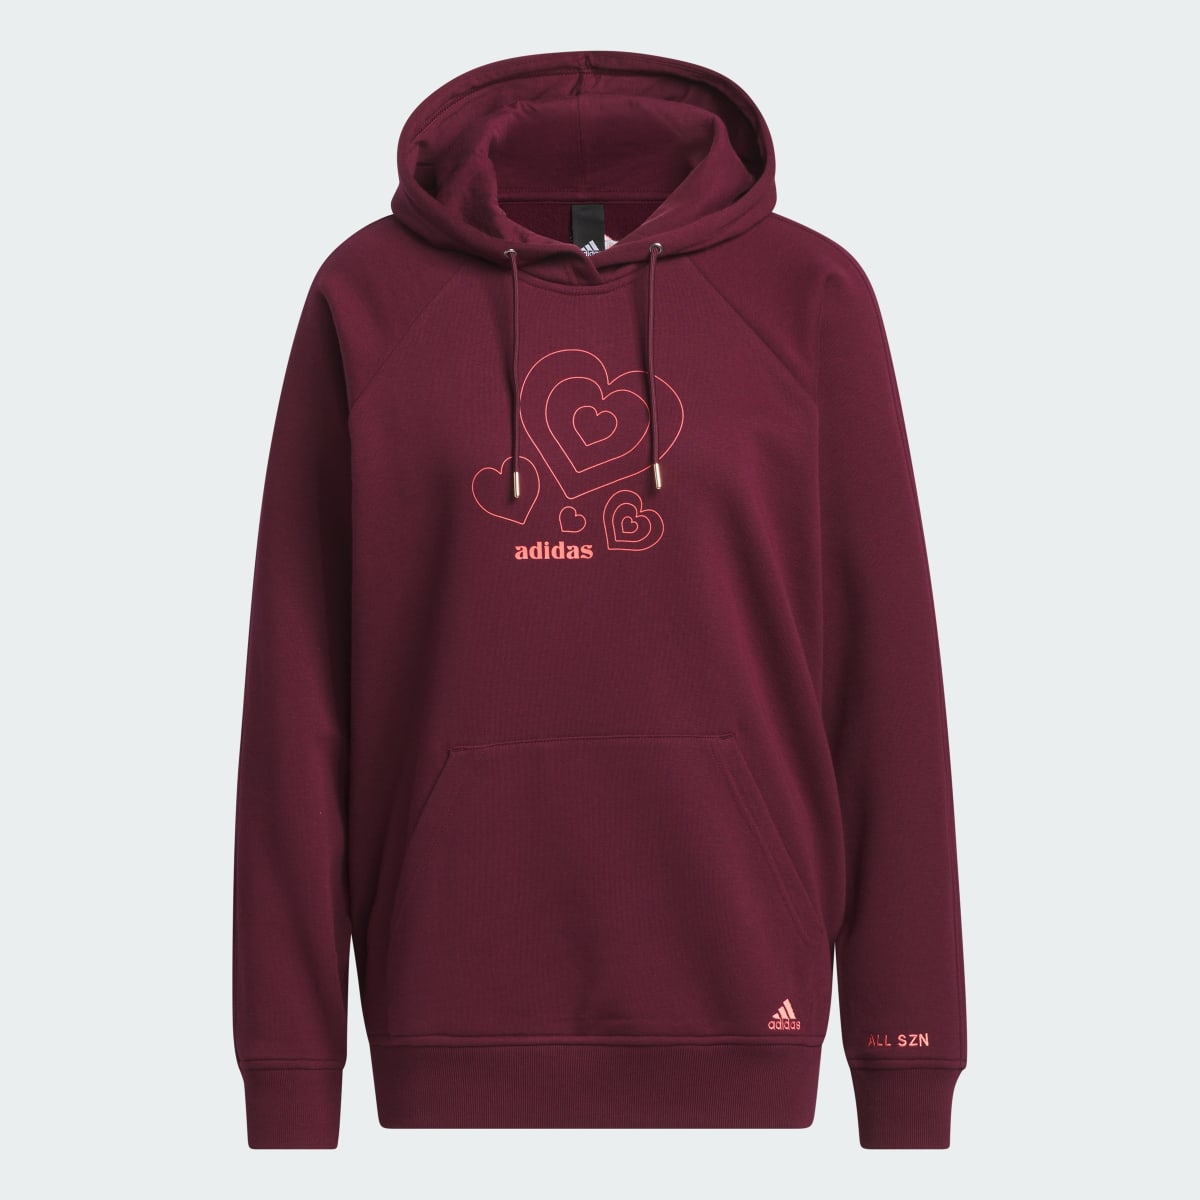 Adidas ALL SZN Valentine's Day Pullover Hoodie. 5